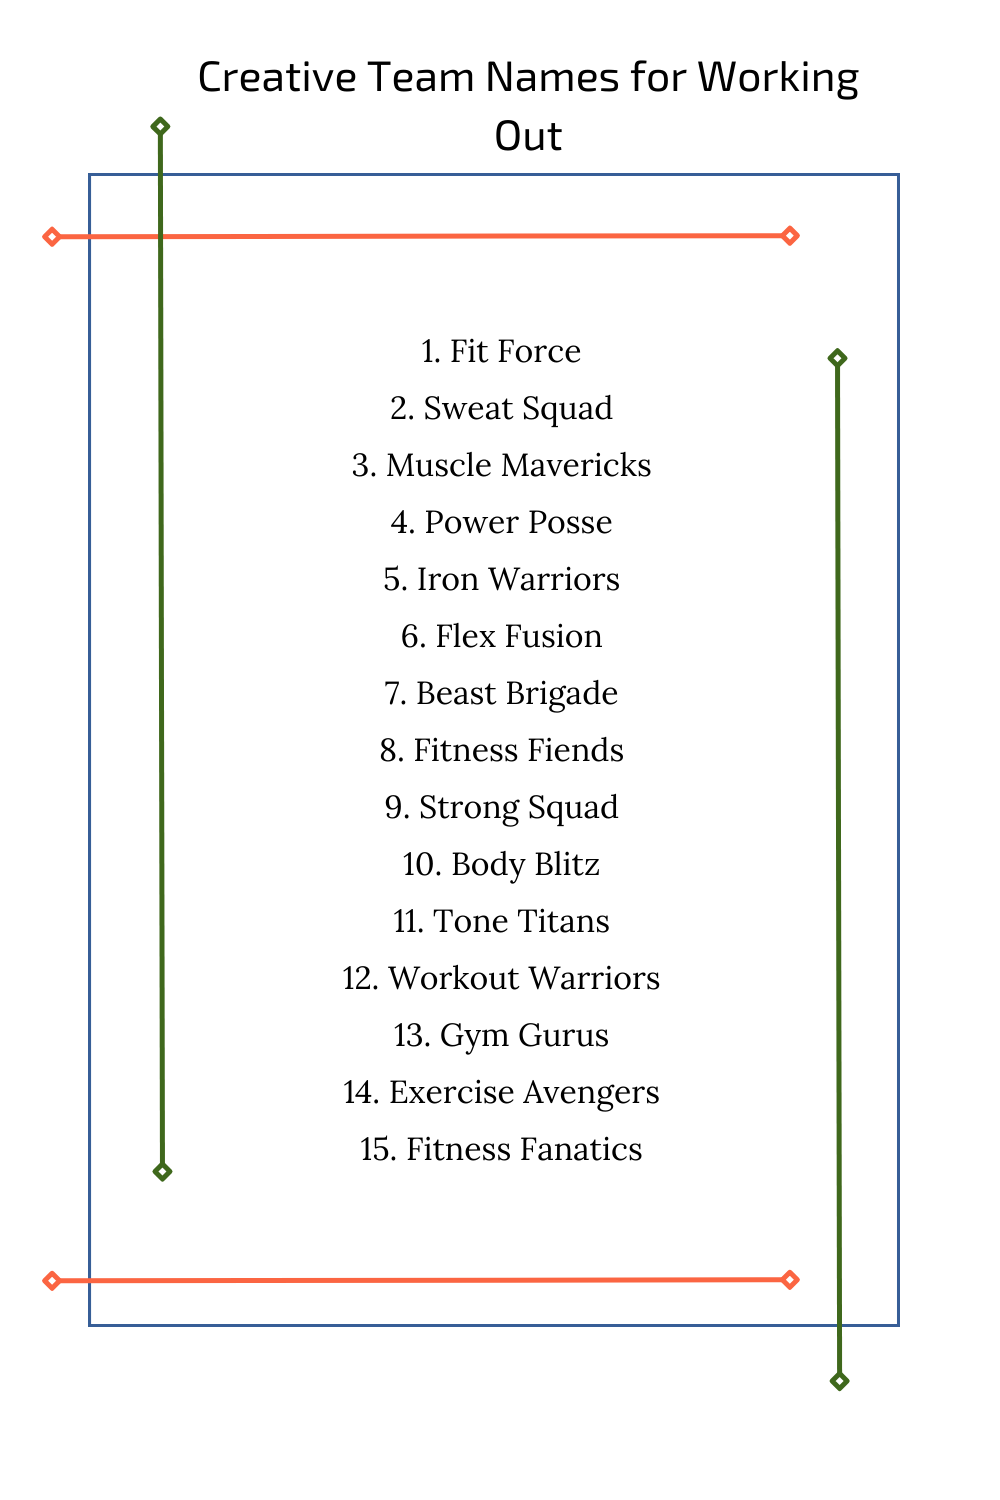 Creative Team Names for Working Out